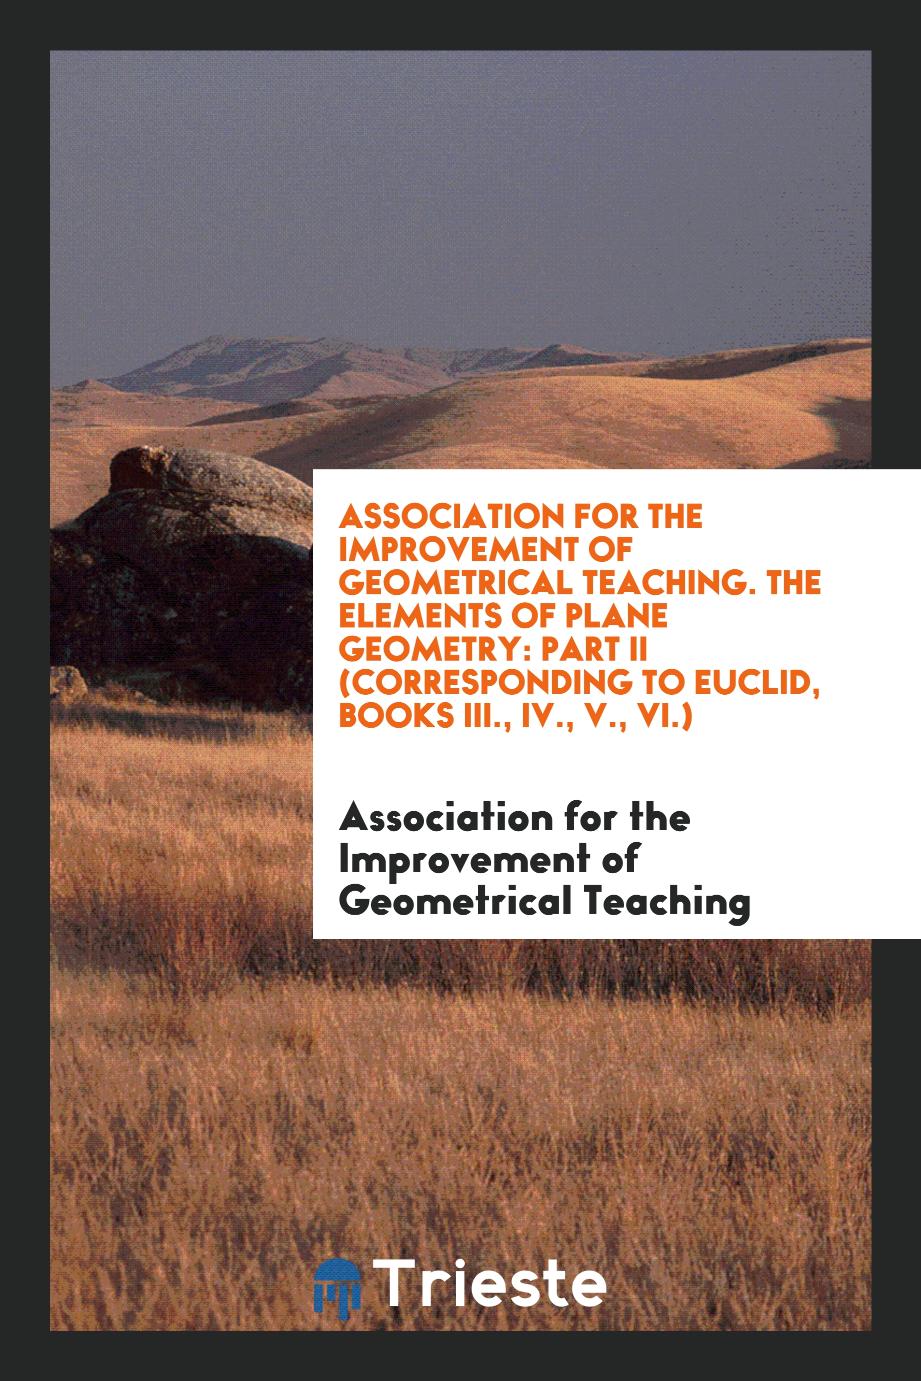 Association for the Improvement of Geometrical Teaching. The Elements of Plane Geometry: Part II (Corresponding to Euclid, Books III., IV., V., VI.)